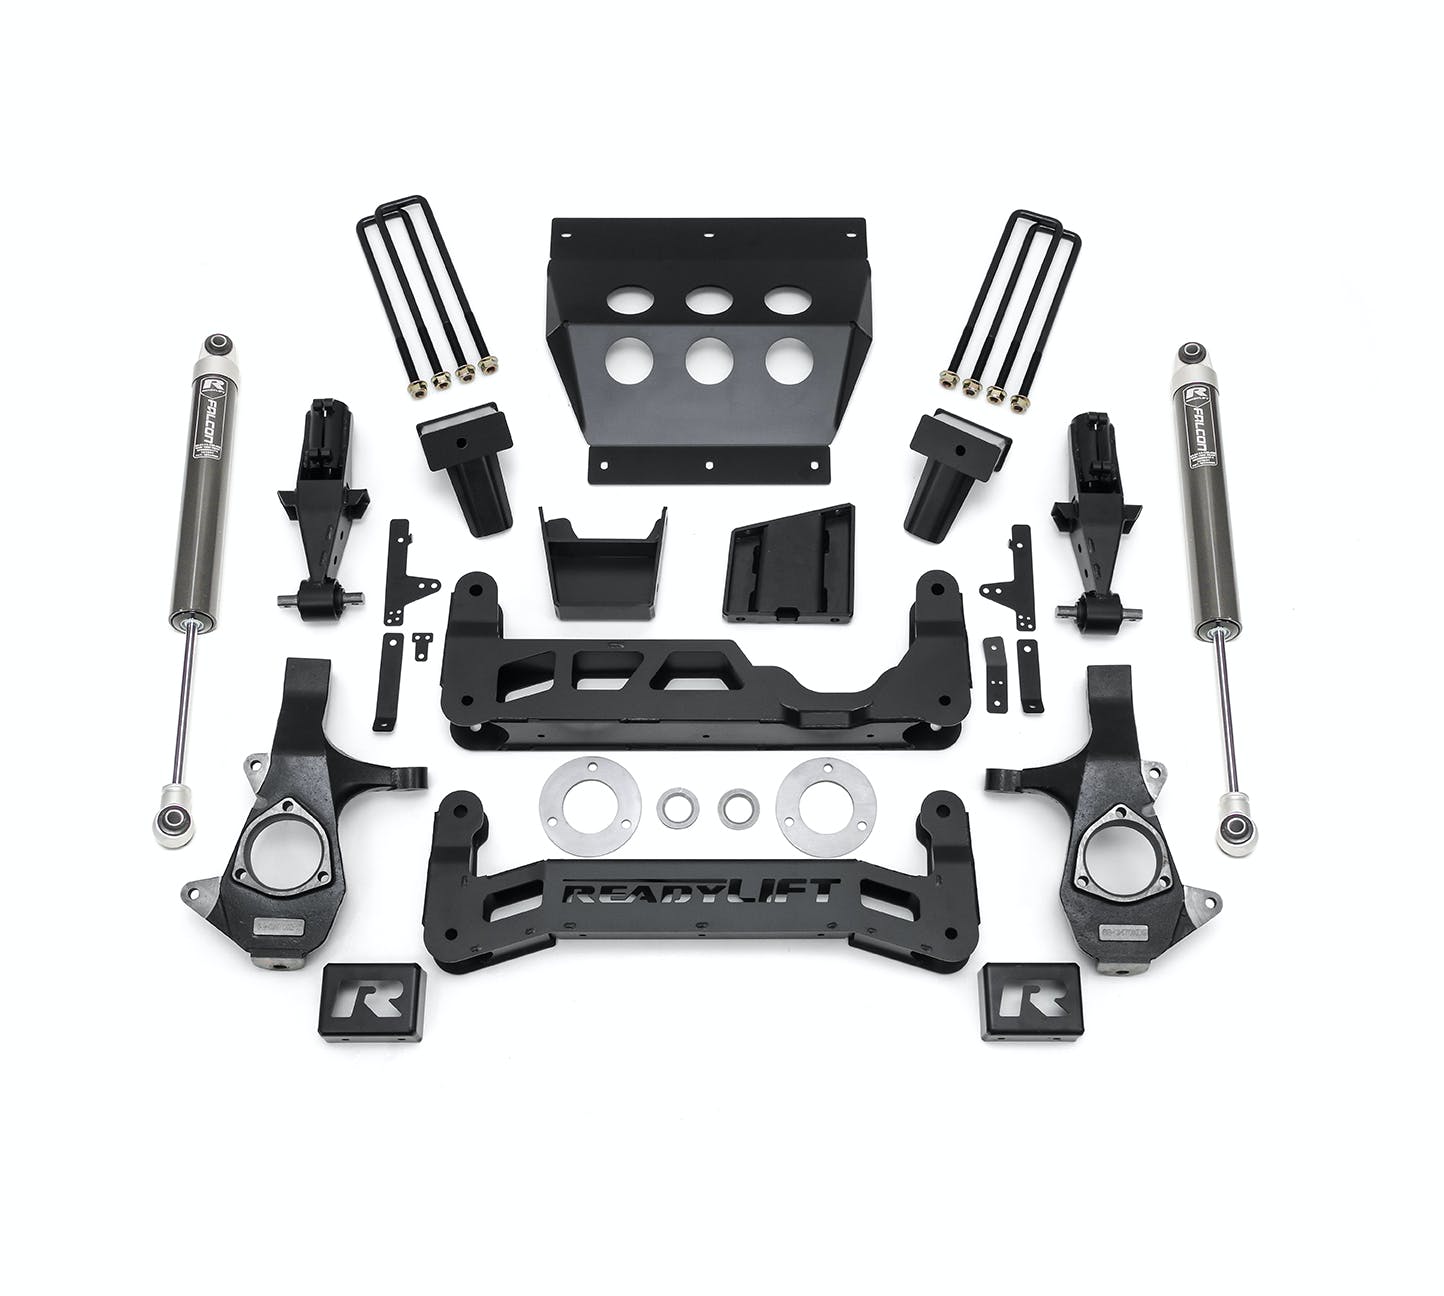 ReadyLIFT 44-34710 7" Big Lift Kit for Cast Steel OE Upper Control Arms, Falcon 1.1 Monotube Shock